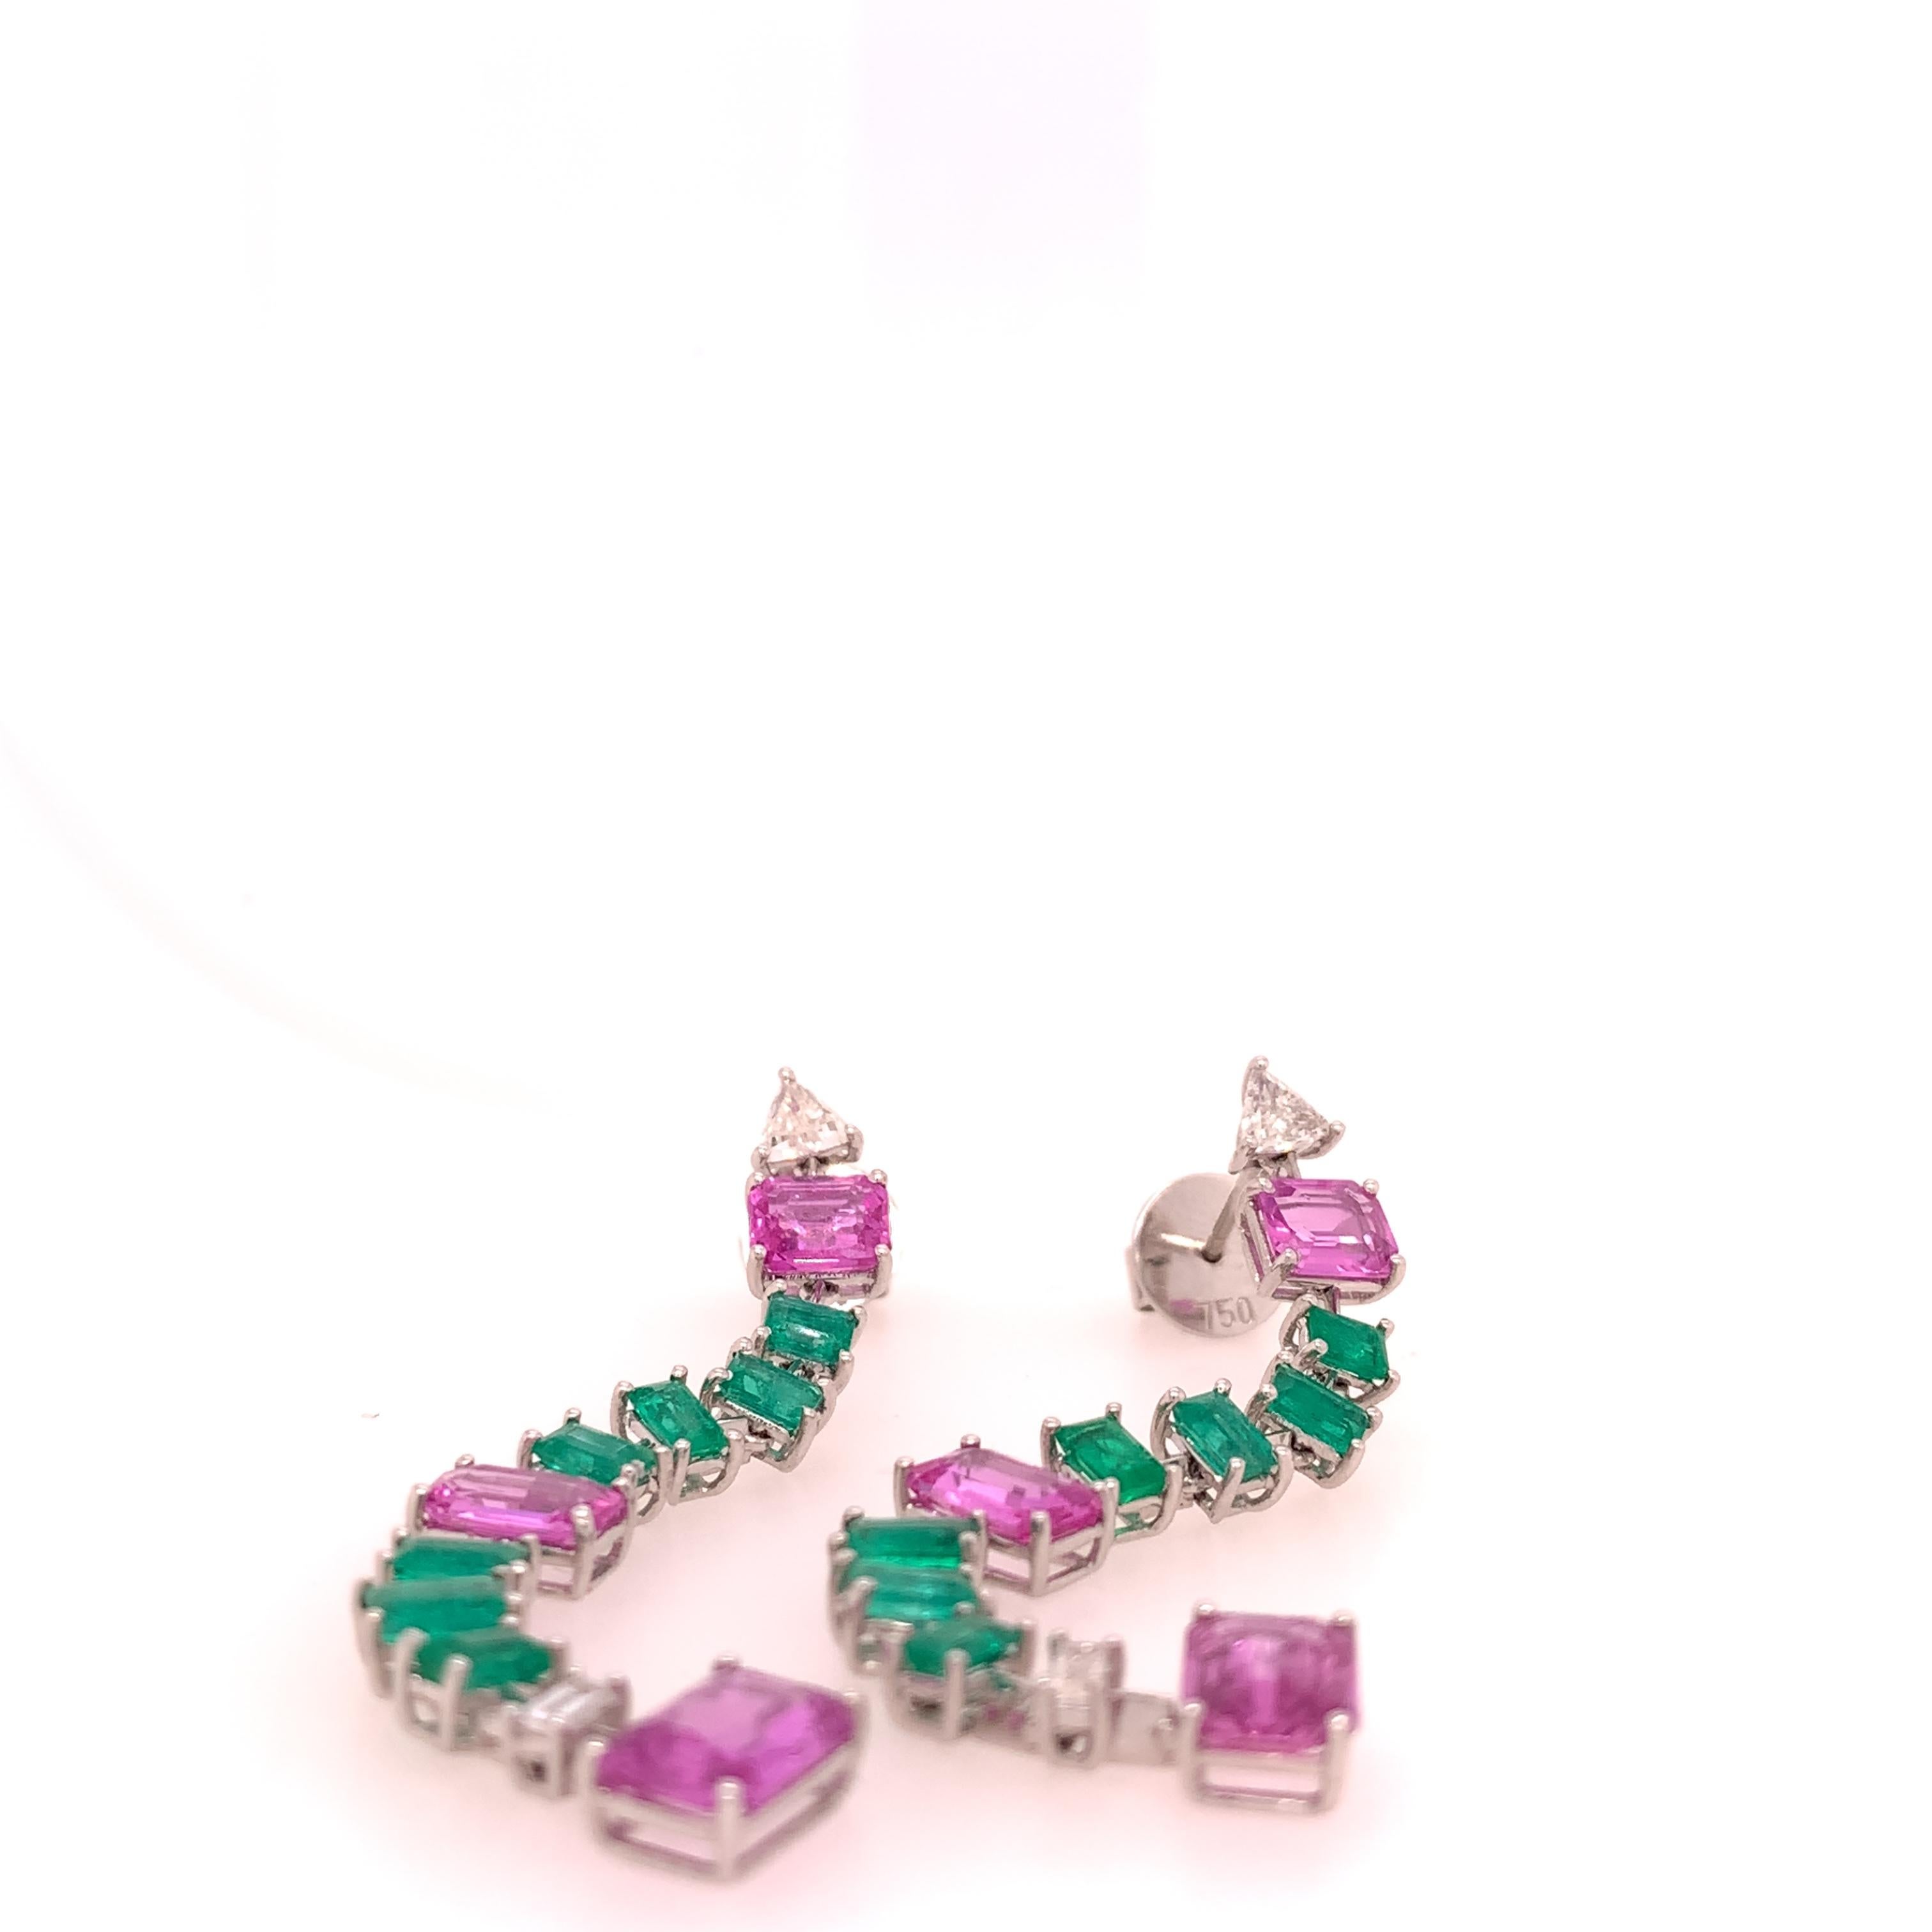 18K White Gold
Pink Sapphire: 6.61ct total weight
Emerald: 2.46ct total weight
Diamonds: 0.65ct total weight.
All diamonds are G-H/SI Stones